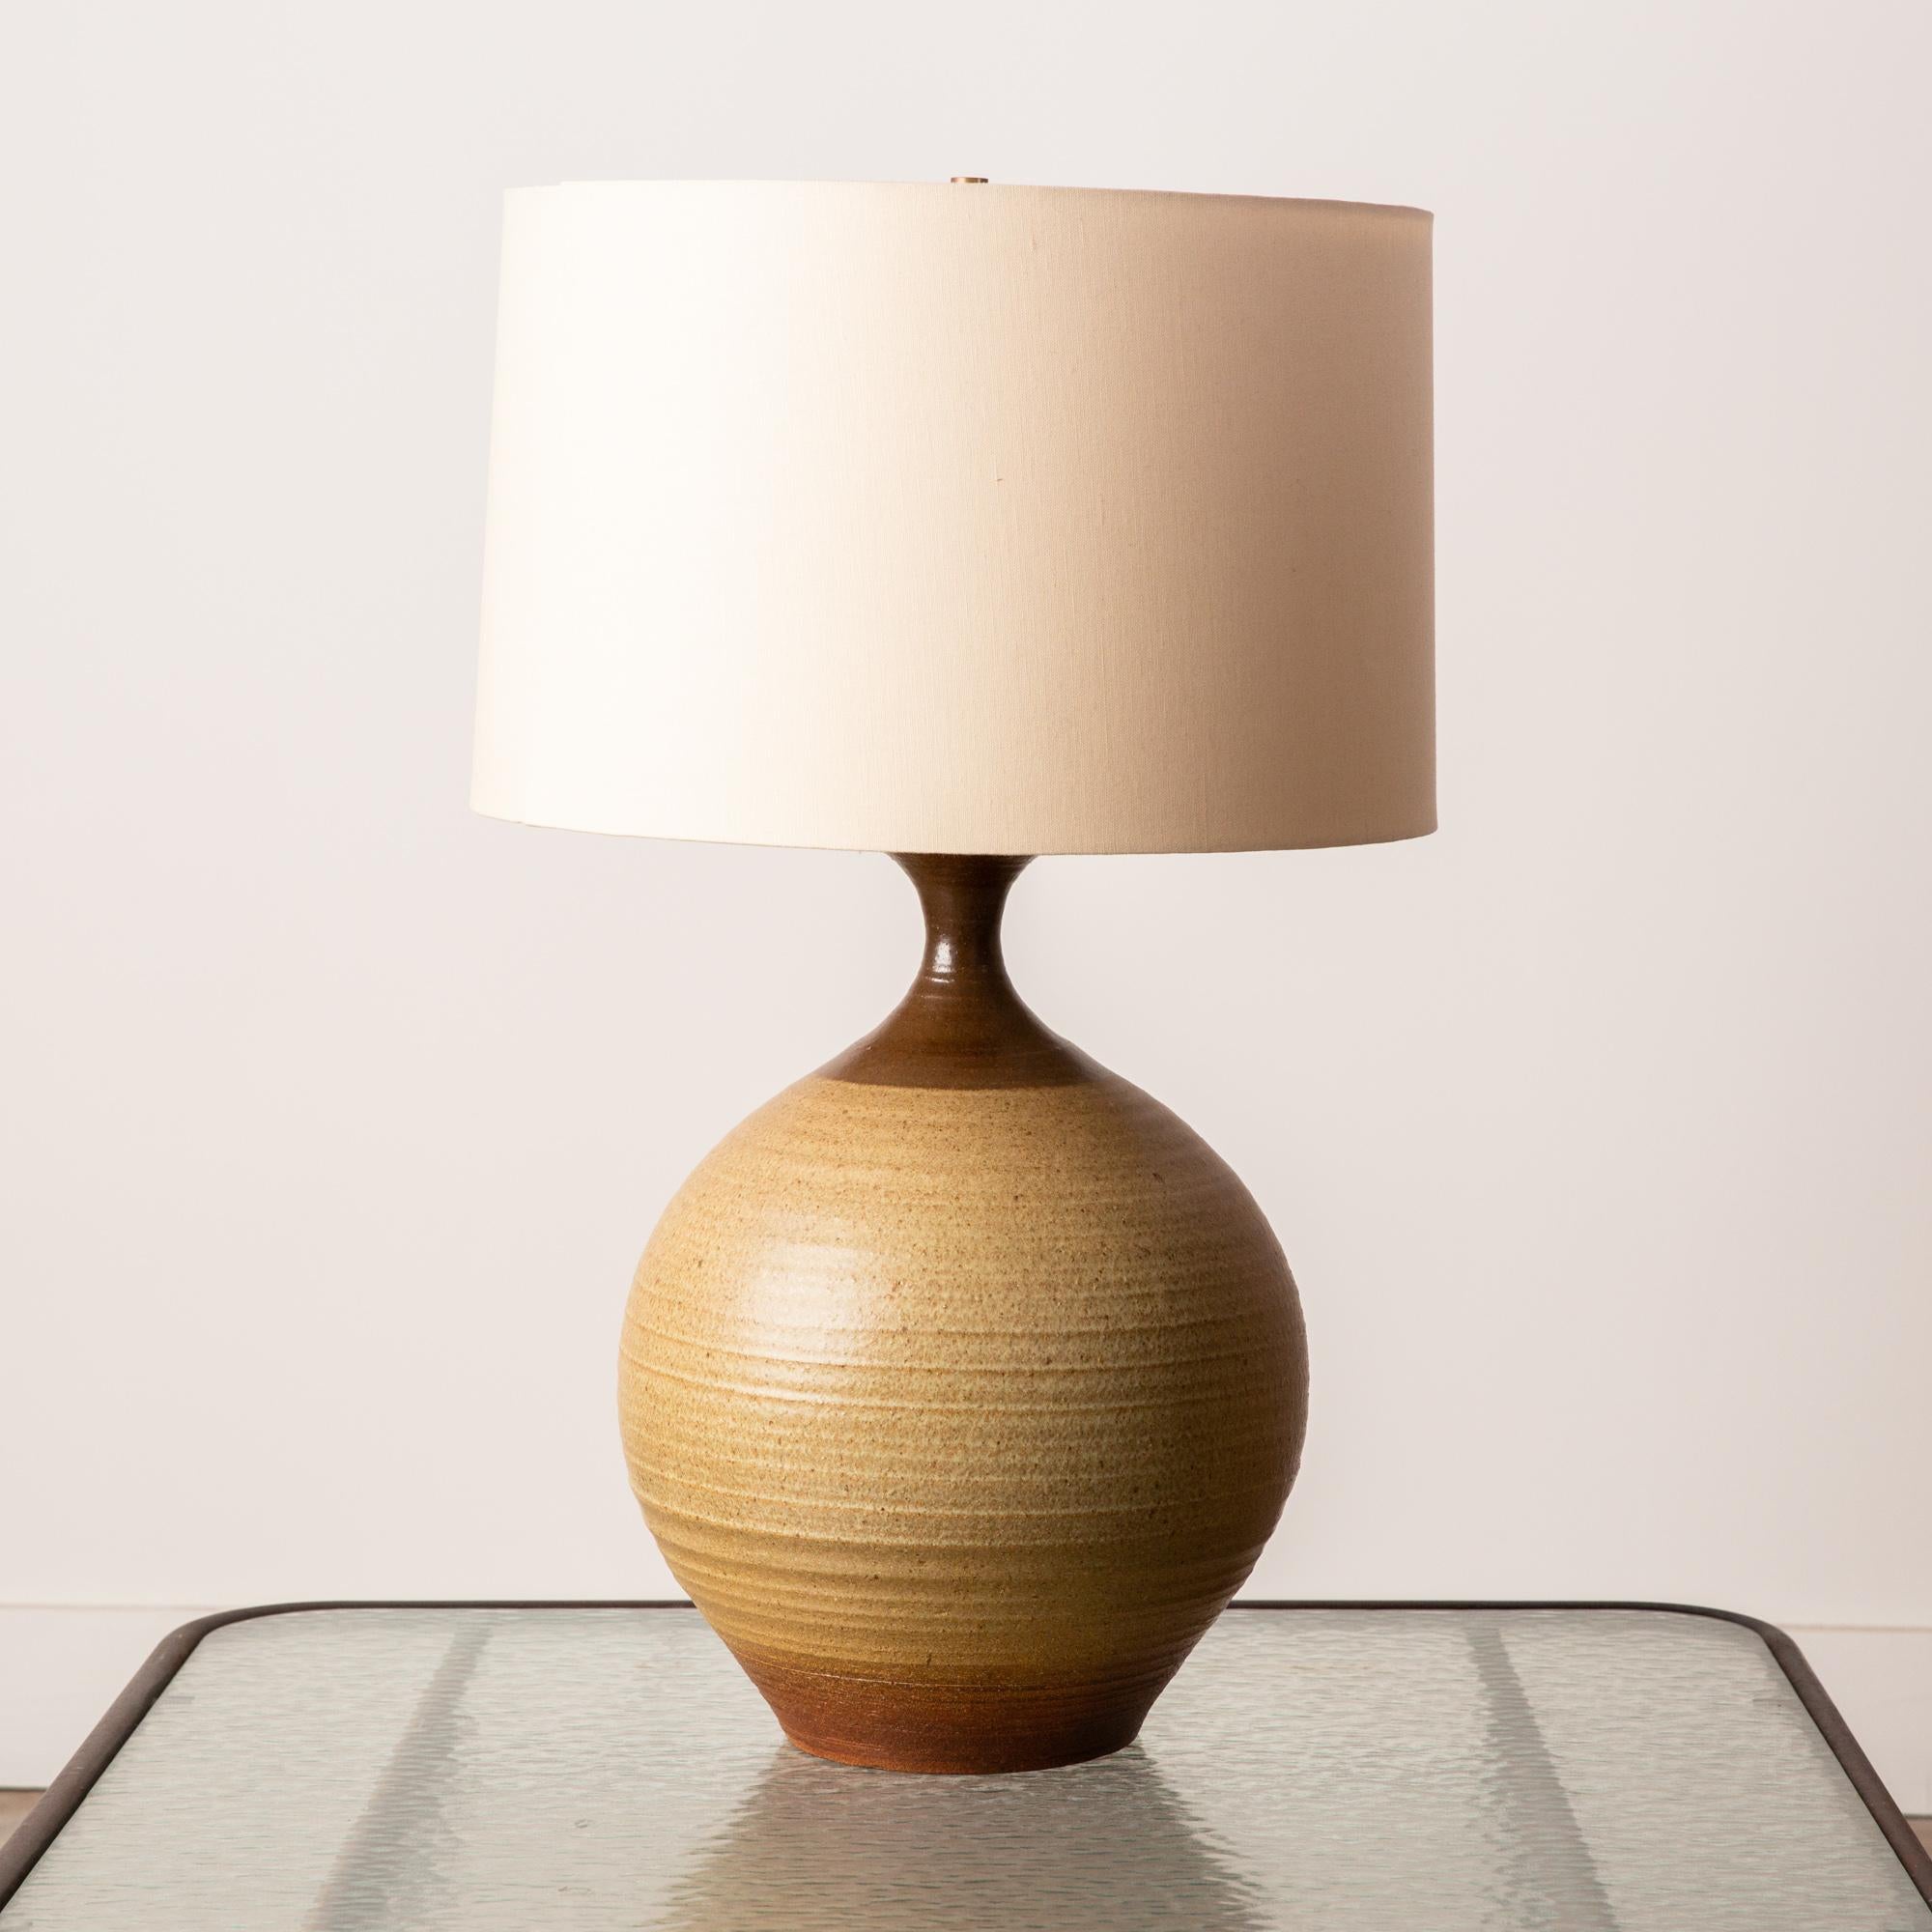 A large stoneware lamp by California ceramicist Bob Kinzie for his company, affiliated craftsmen. The wheel-thrown curved body of the ceramic lamp is lightly ribbed in texture and has a brown color-blocked band at the base and where the vessel